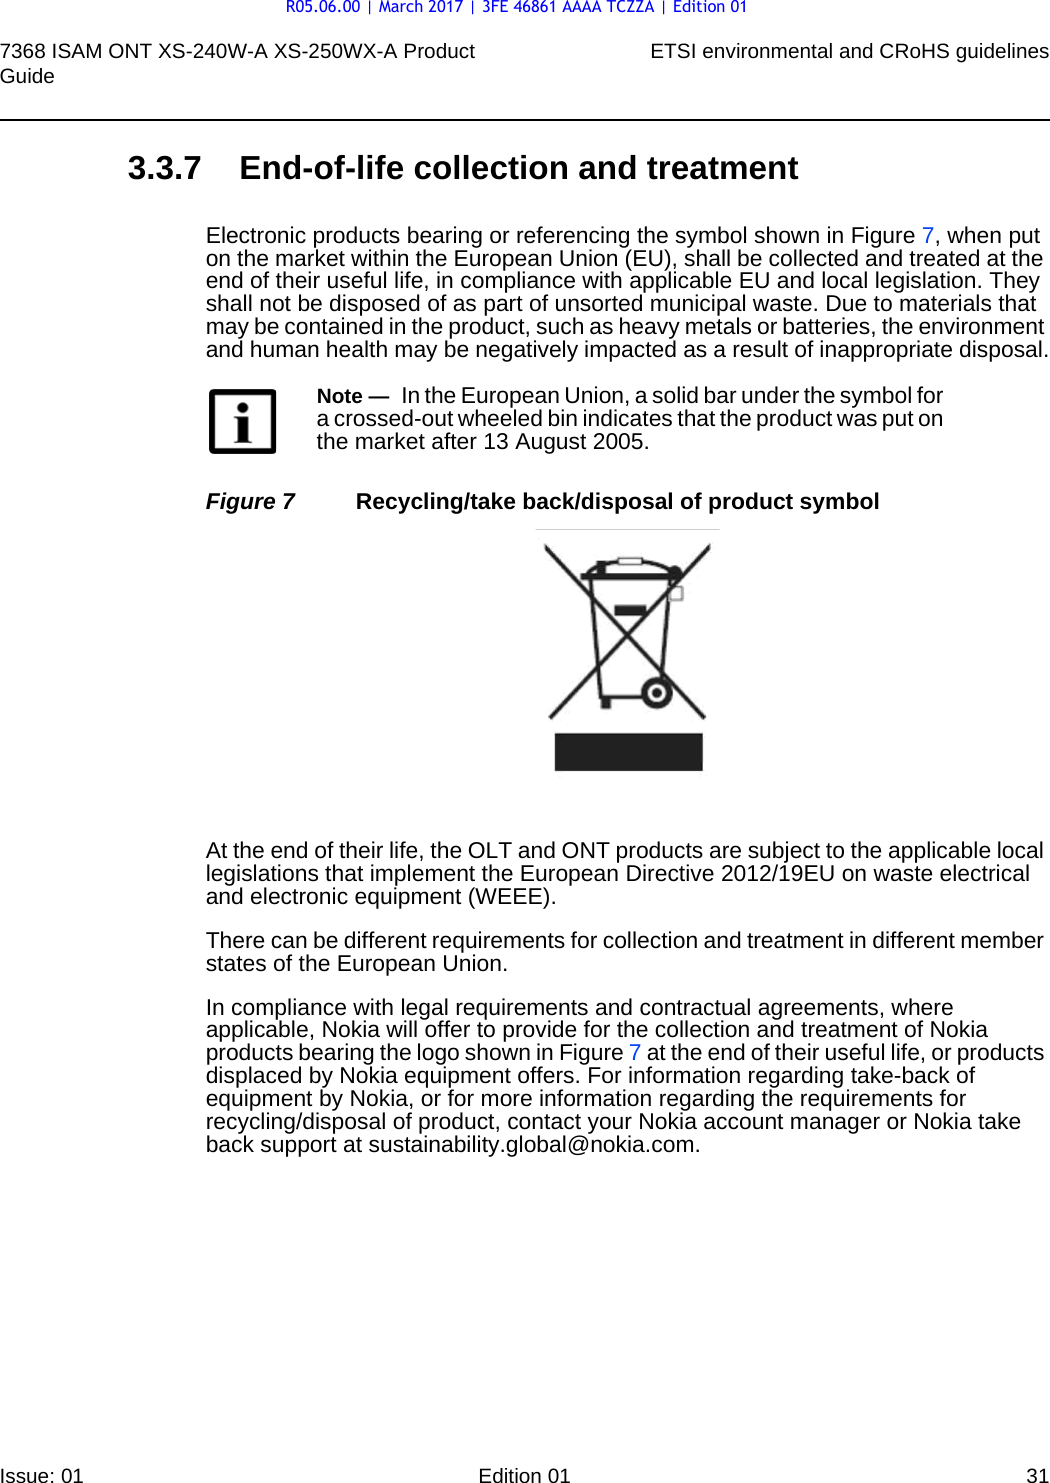 7368 ISAM ONT XS-240W-A XS-250WX-A Product Guide ETSI environmental and CRoHS guidelinesIssue: 01 Edition 01 31 3.3.7 End-of-life collection and treatmentElectronic products bearing or referencing the symbol shown in Figure 7, when put on the market within the European Union (EU), shall be collected and treated at the end of their useful life, in compliance with applicable EU and local legislation. They shall not be disposed of as part of unsorted municipal waste. Due to materials that may be contained in the product, such as heavy metals or batteries, the environment and human health may be negatively impacted as a result of inappropriate disposal.Figure 7 Recycling/take back/disposal of product symbolAt the end of their life, the OLT and ONT products are subject to the applicable local legislations that implement the European Directive 2012/19EU on waste electrical and electronic equipment (WEEE).There can be different requirements for collection and treatment in different member states of the European Union. In compliance with legal requirements and contractual agreements, where applicable, Nokia will offer to provide for the collection and treatment of Nokia products bearing the logo shown in Figure 7 at the end of their useful life, or products displaced by Nokia equipment offers. For information regarding take-back of equipment by Nokia, or for more information regarding the requirements for recycling/disposal of product, contact your Nokia account manager or Nokia take back support at sustainability.global@nokia.com.Note —  In the European Union, a solid bar under the symbol for a crossed-out wheeled bin indicates that the product was put on the market after 13 August 2005.R05.06.00 | March 2017 | 3FE 46861 AAAA TCZZA | Edition 01